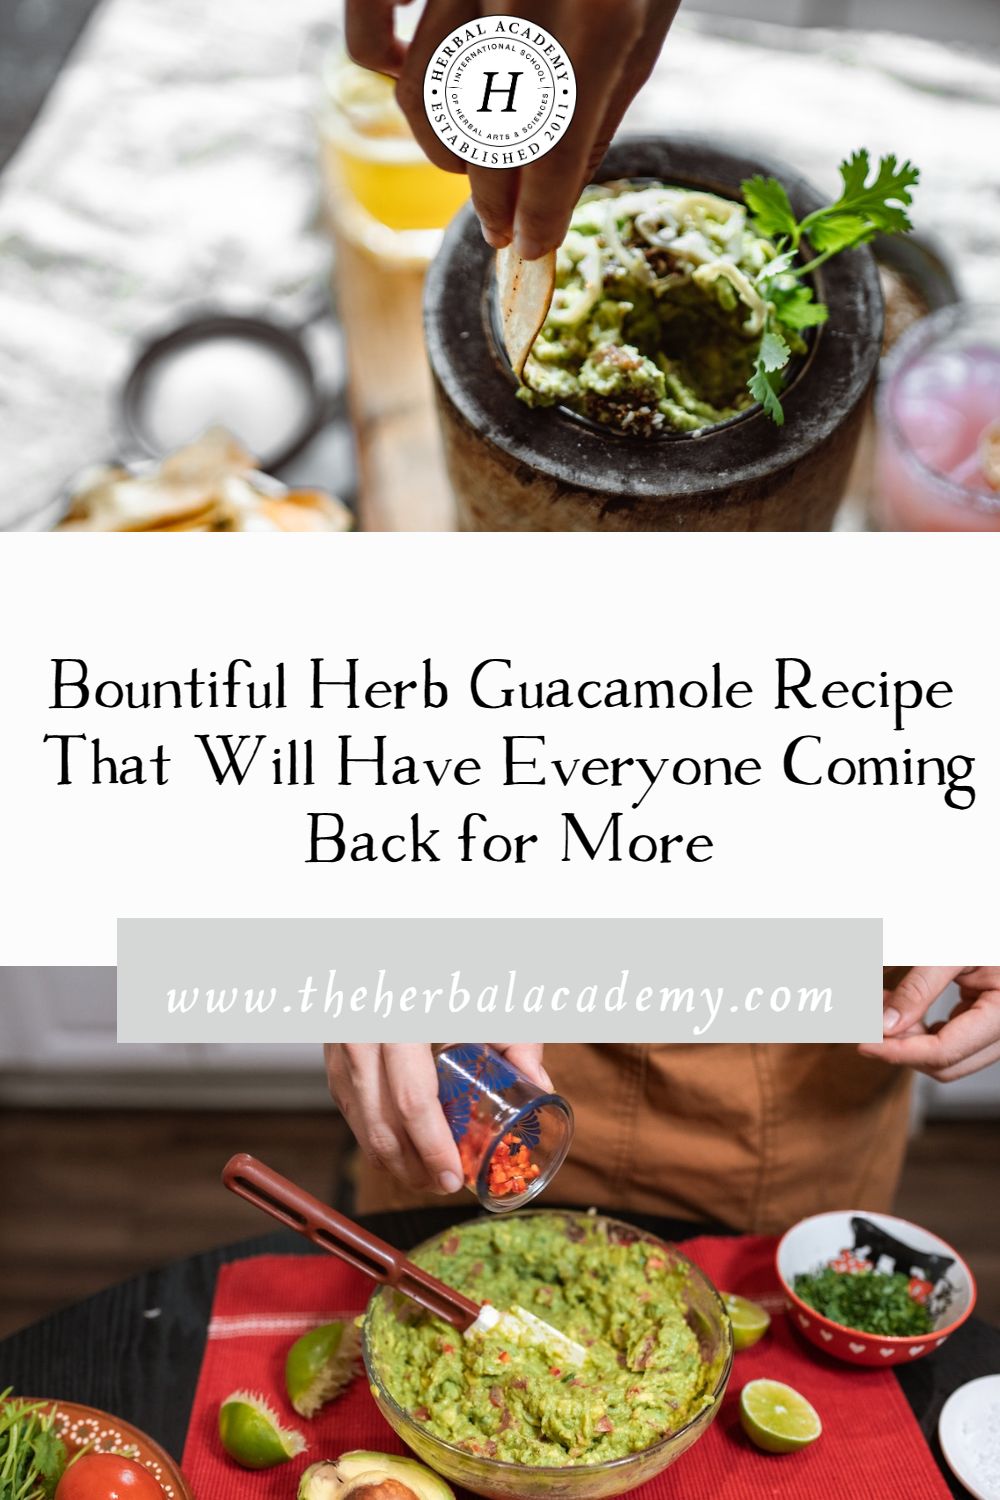 Bountiful Herb Guacamole Recipe That Will Have Everyone Coming Back for More | Herbal Academy | Our Bountiful Herb Guacamole Recipe features fresh avocados, chopped herbs, garlic, lime juice, and salt. Healthy, simple, delicious!